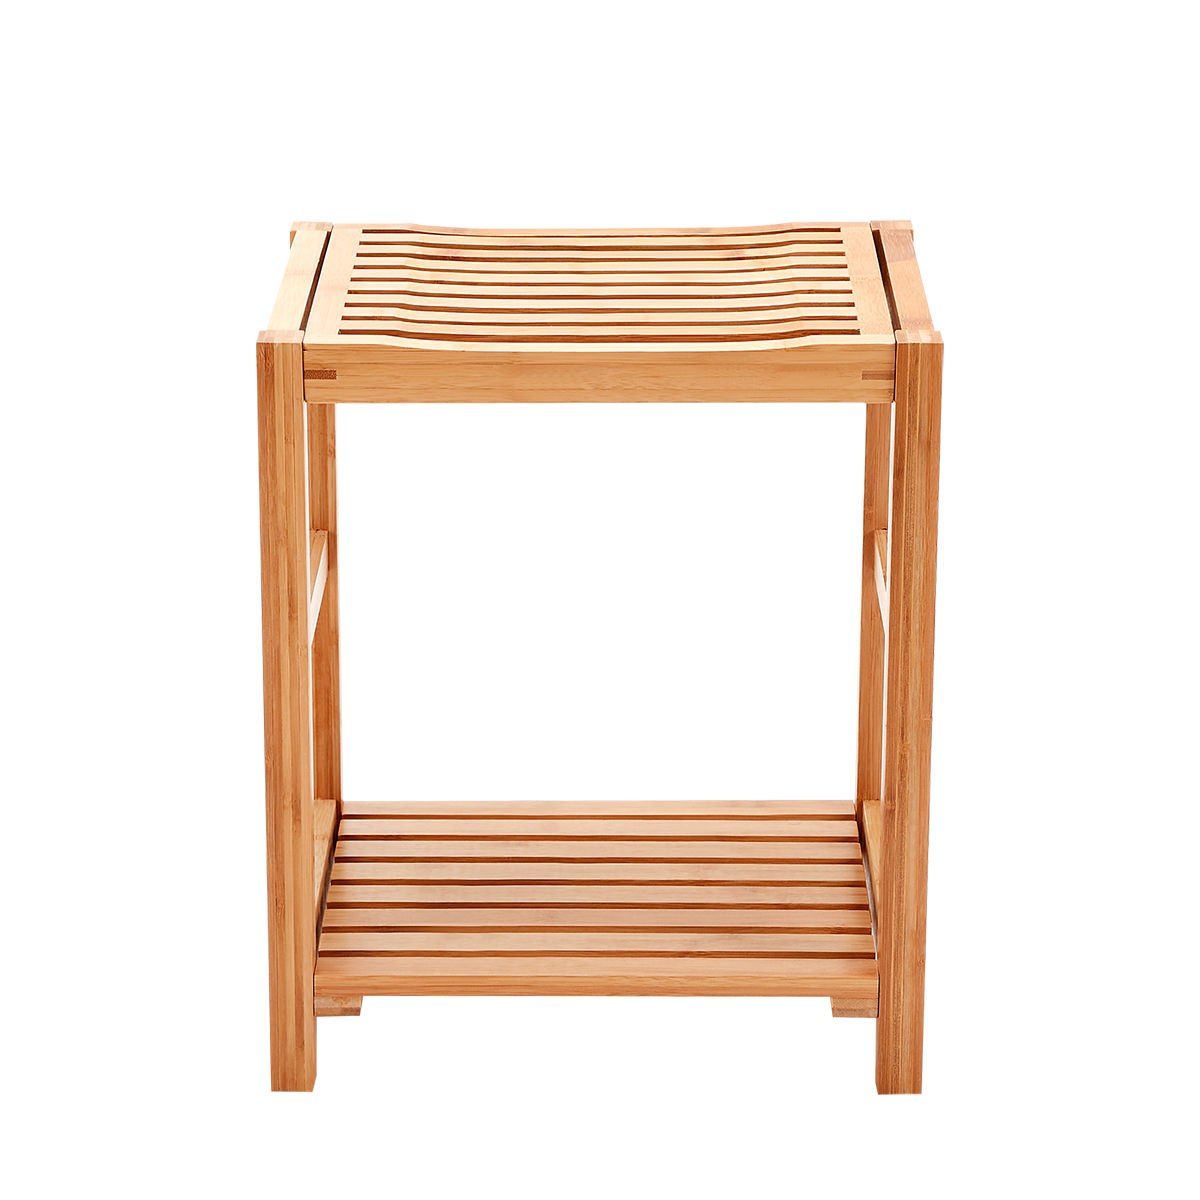 Bth-02100 Natural Bamboo Shower Bench Seat, Shaving Stool, Spa Bath Bench With Storage Shelf